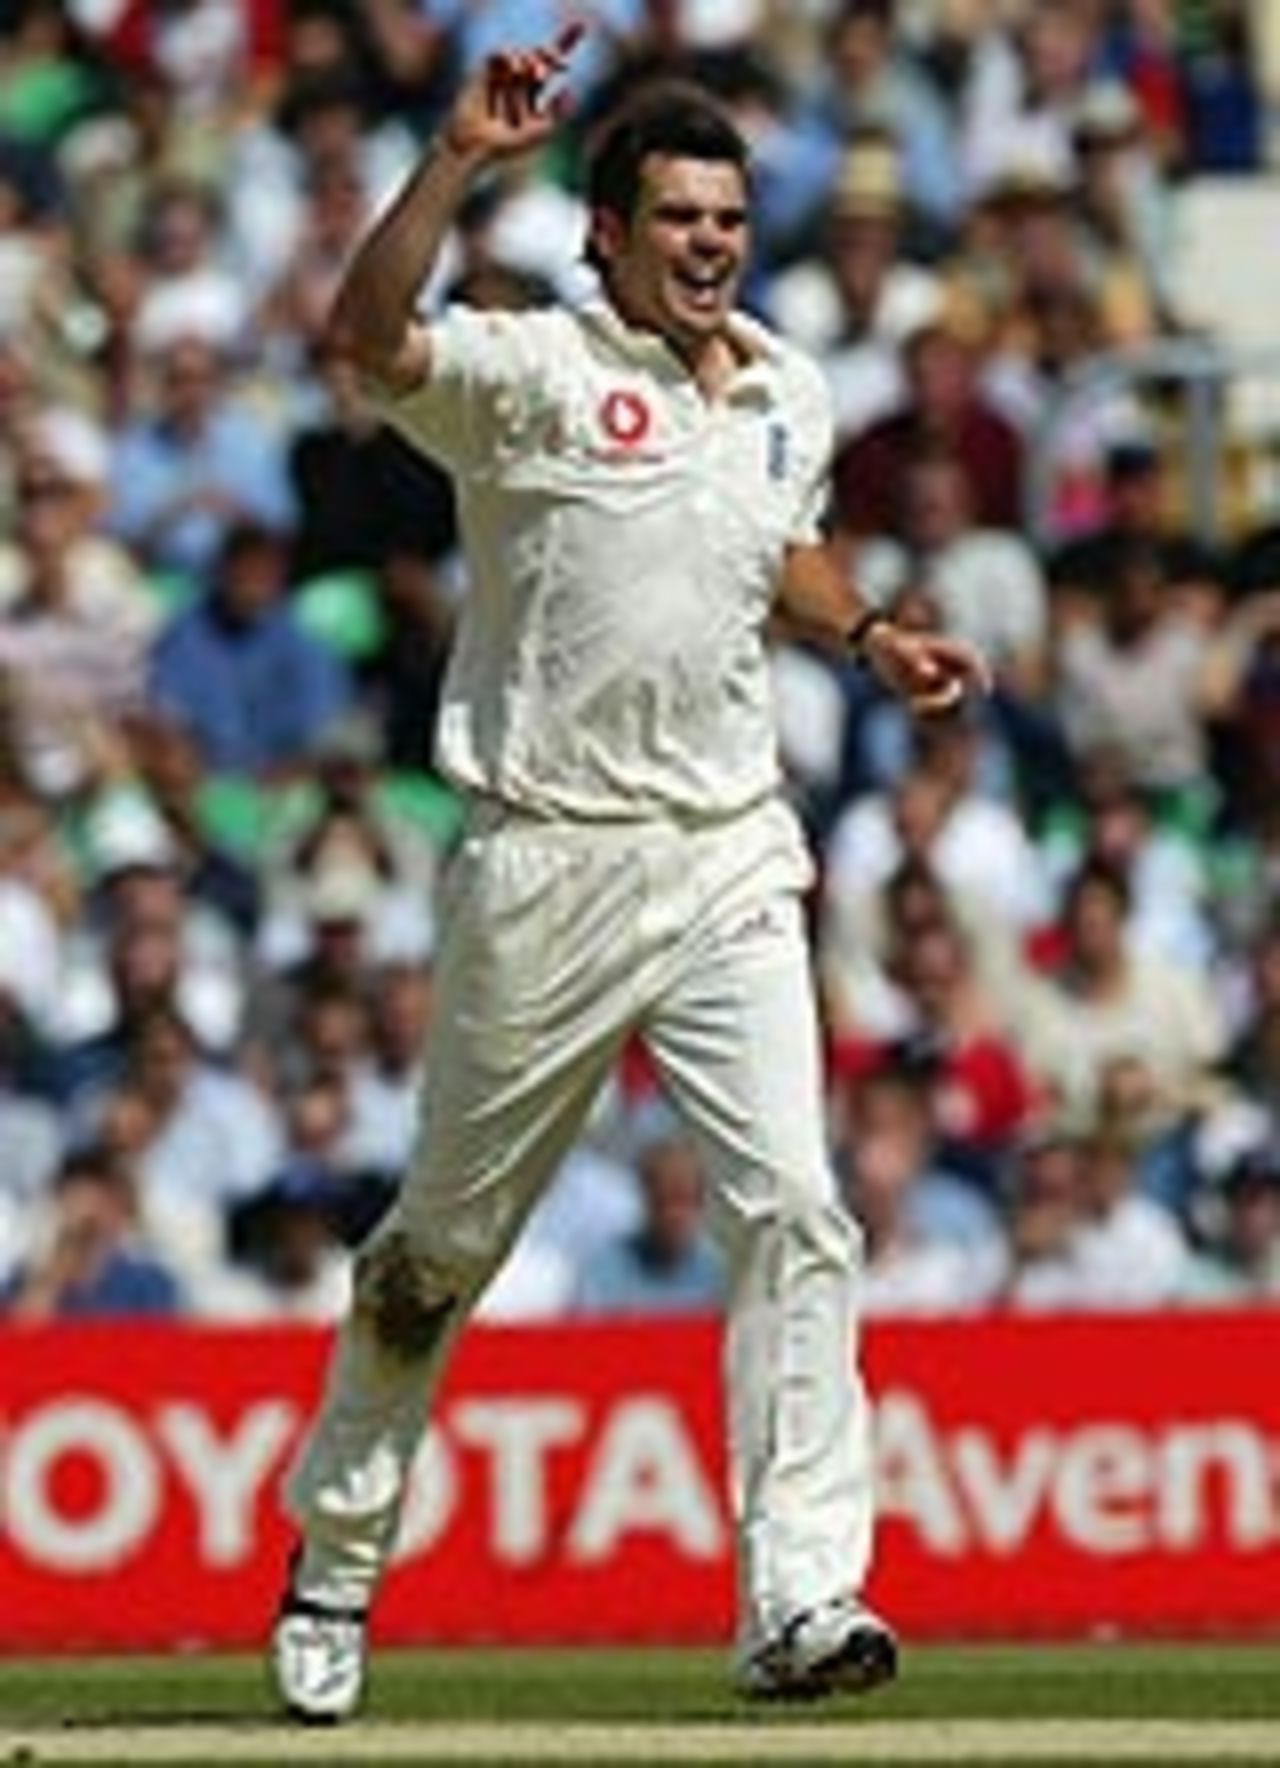 James Anderson celebrates the big wicket of Brian Lara, as England complete the whitewash in the fourth Test at The Oval, August 21, 2004